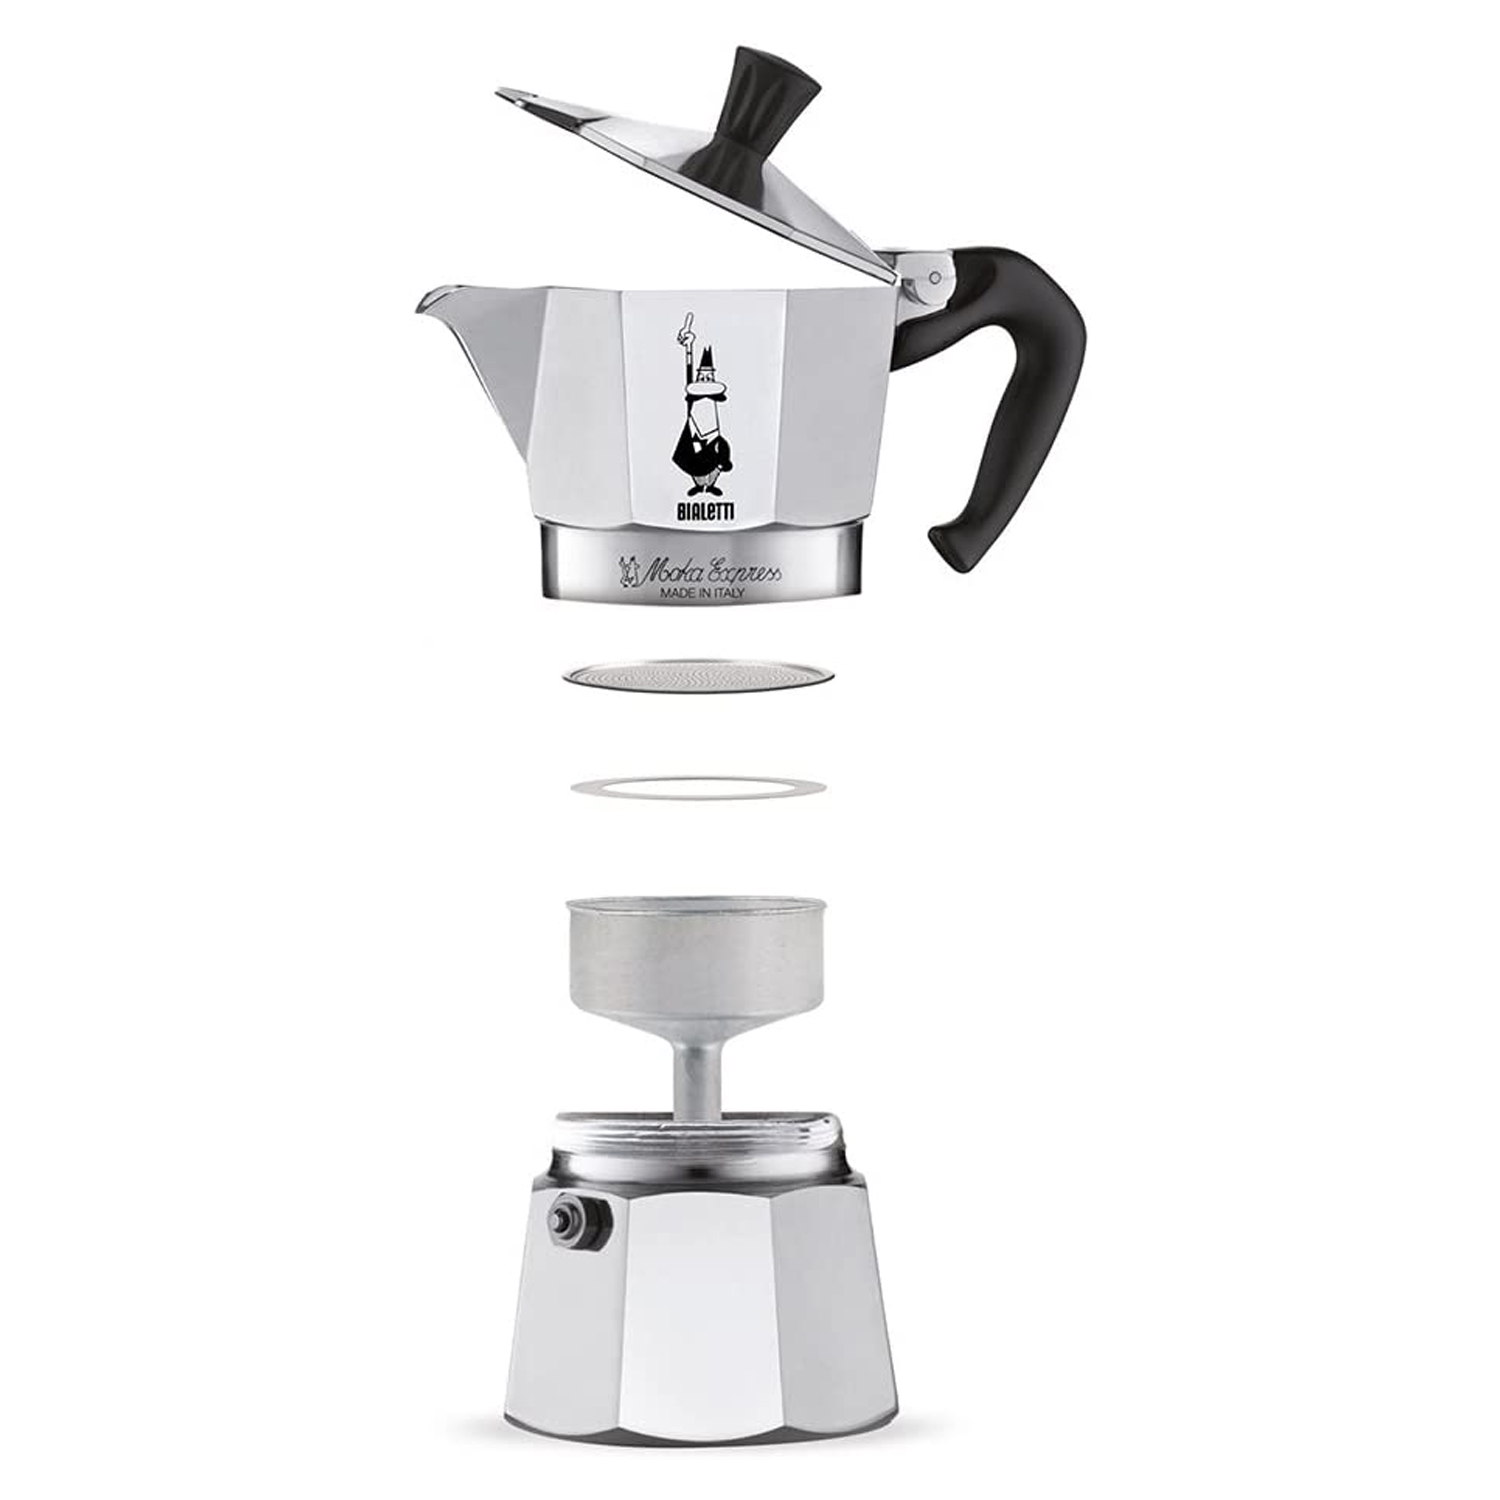 Bialetti Aluminum 6 Cup Stovetop Steamer Espresso Coffee Maker Brewer, Silver - image 2 of 7